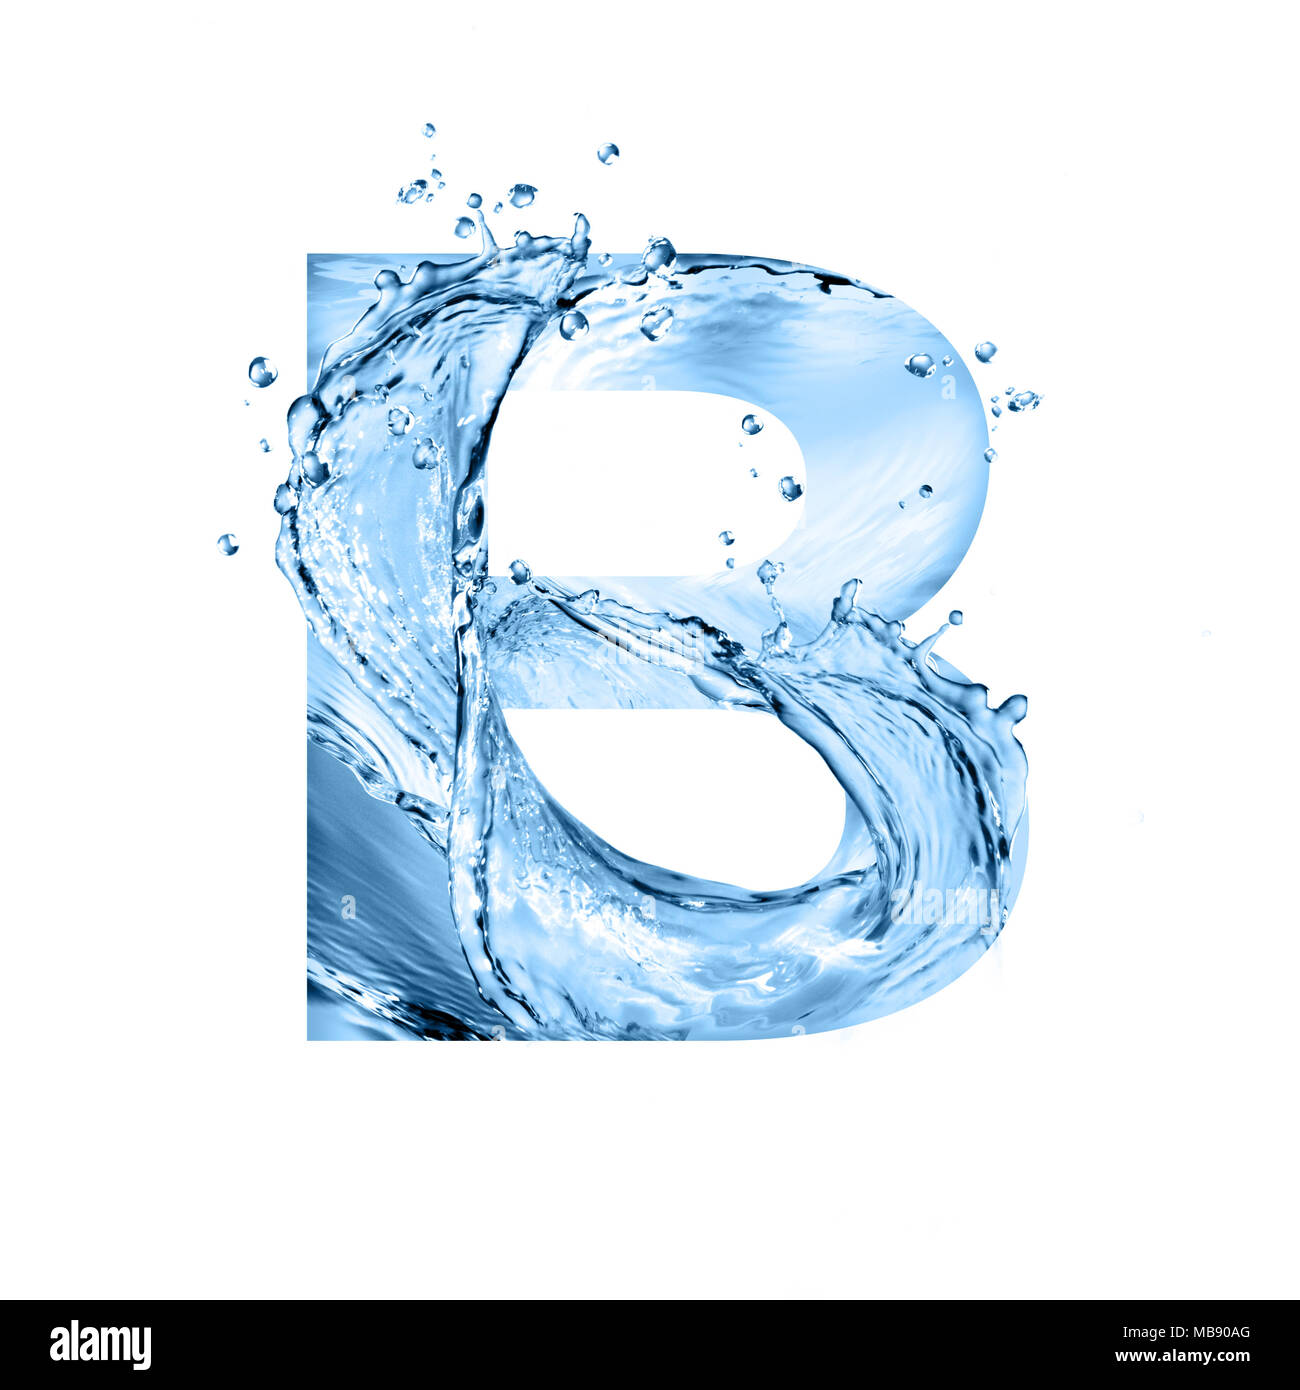 stylized font, art text made of water splashes, capital letter b, isolated on white background Stock Photo